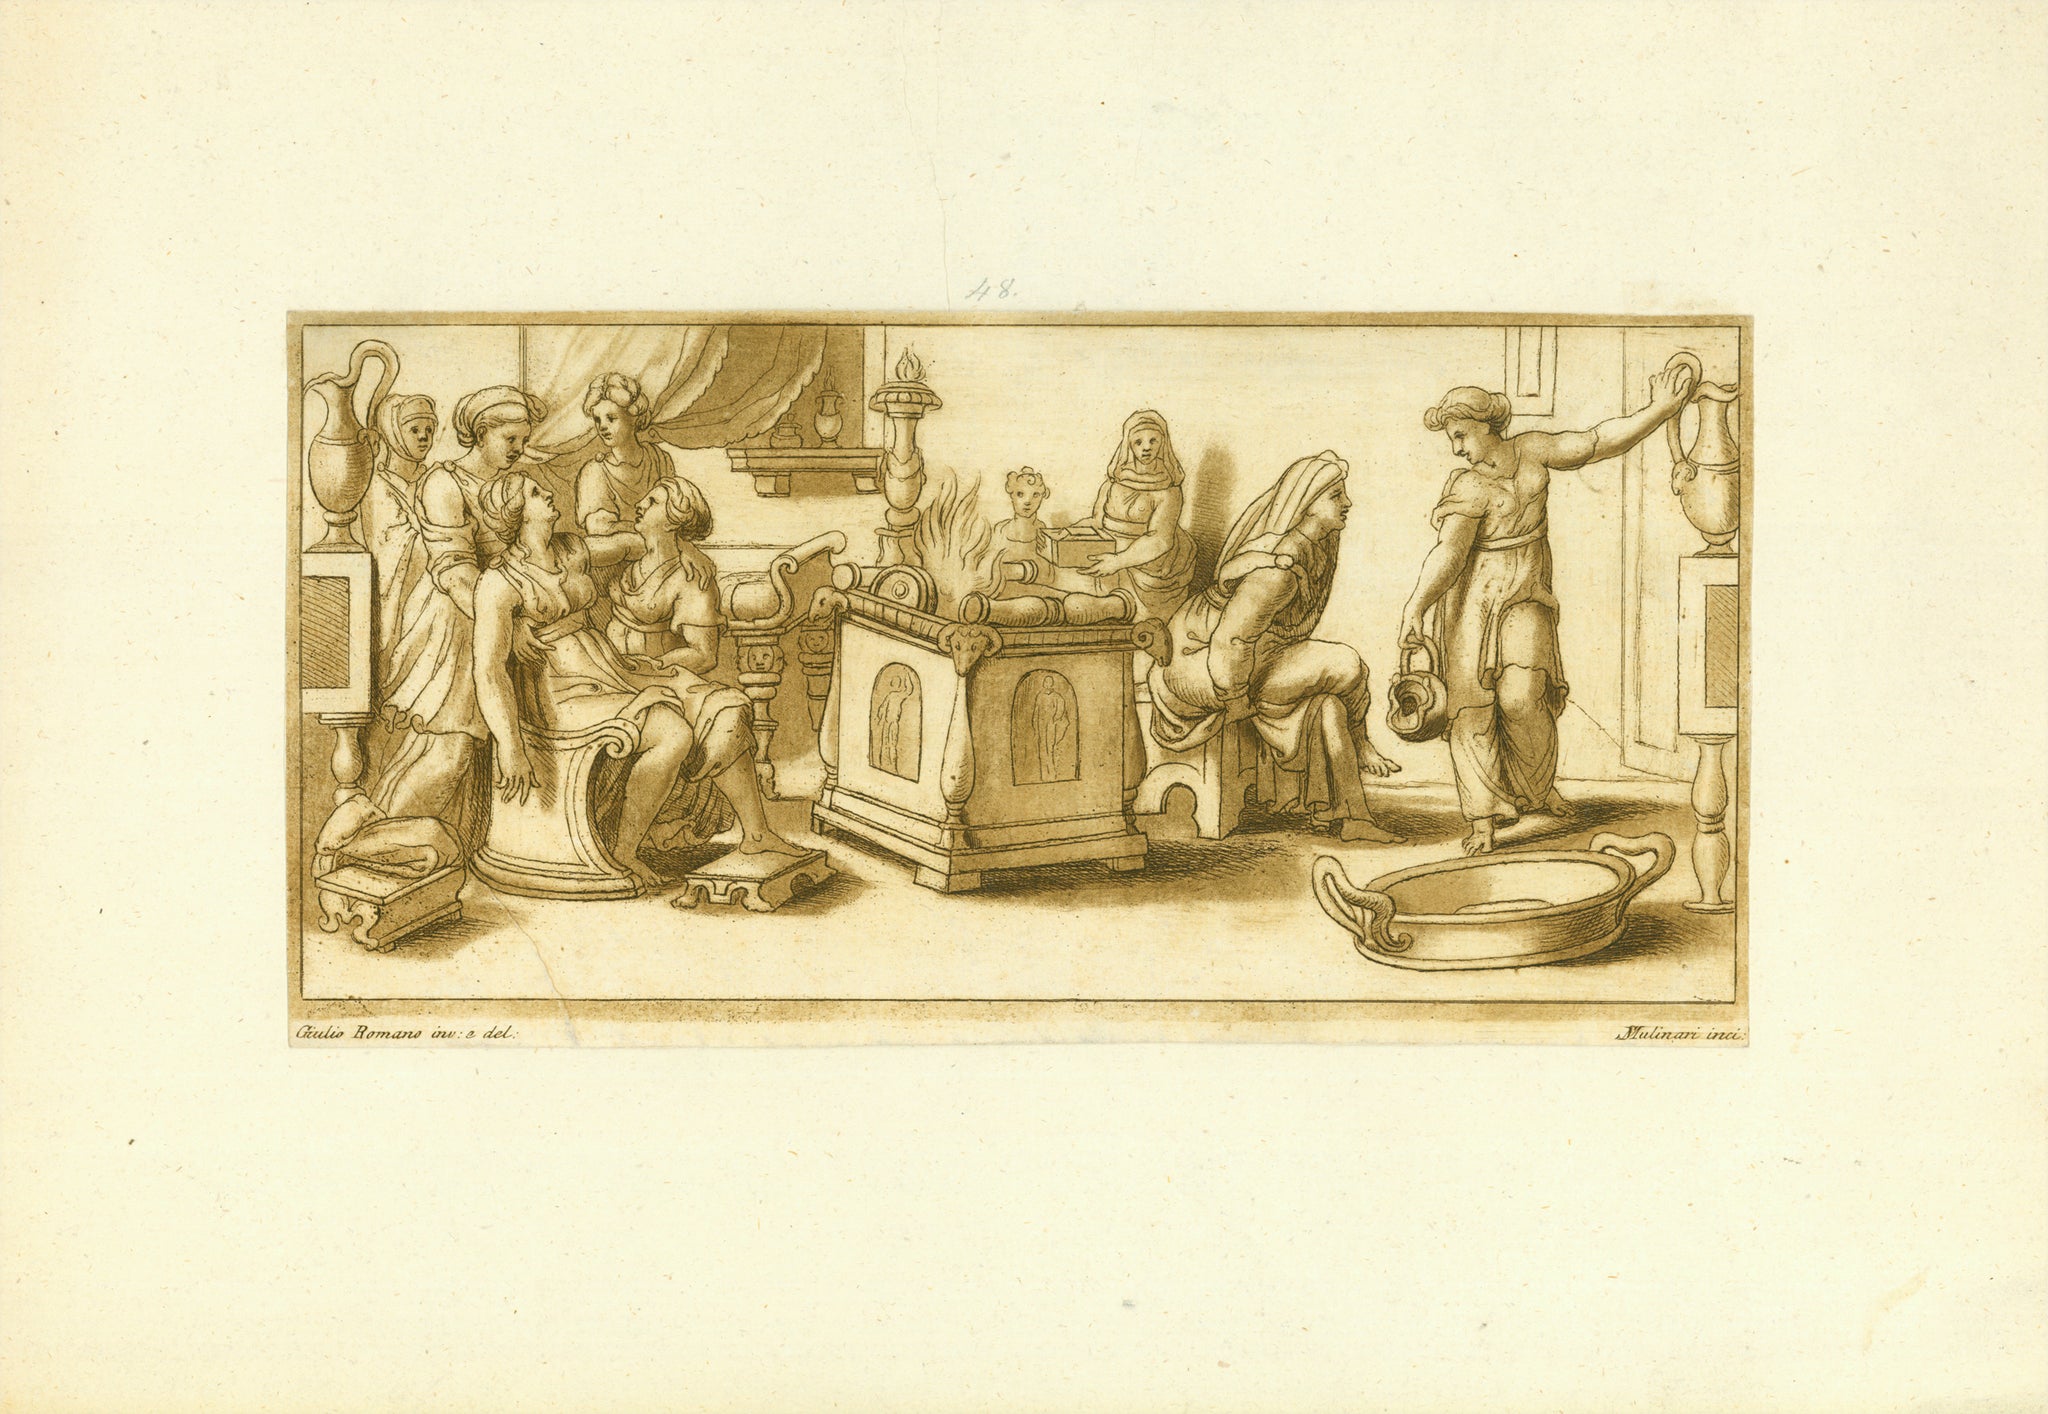 No title. Scene of a midwife and all female helpers to prepare for the giving birth of a pregnant woman in Roman imperial times.  An interesting etching for the profession of a midwife.  Copper etching in sepia ink manner by Stefano  Mulinari (ca. 1741-1790)  After the drawing by Giulio Romano (1499-1546)  Ca. 1820 (this being a guess with small leeway to both sides)